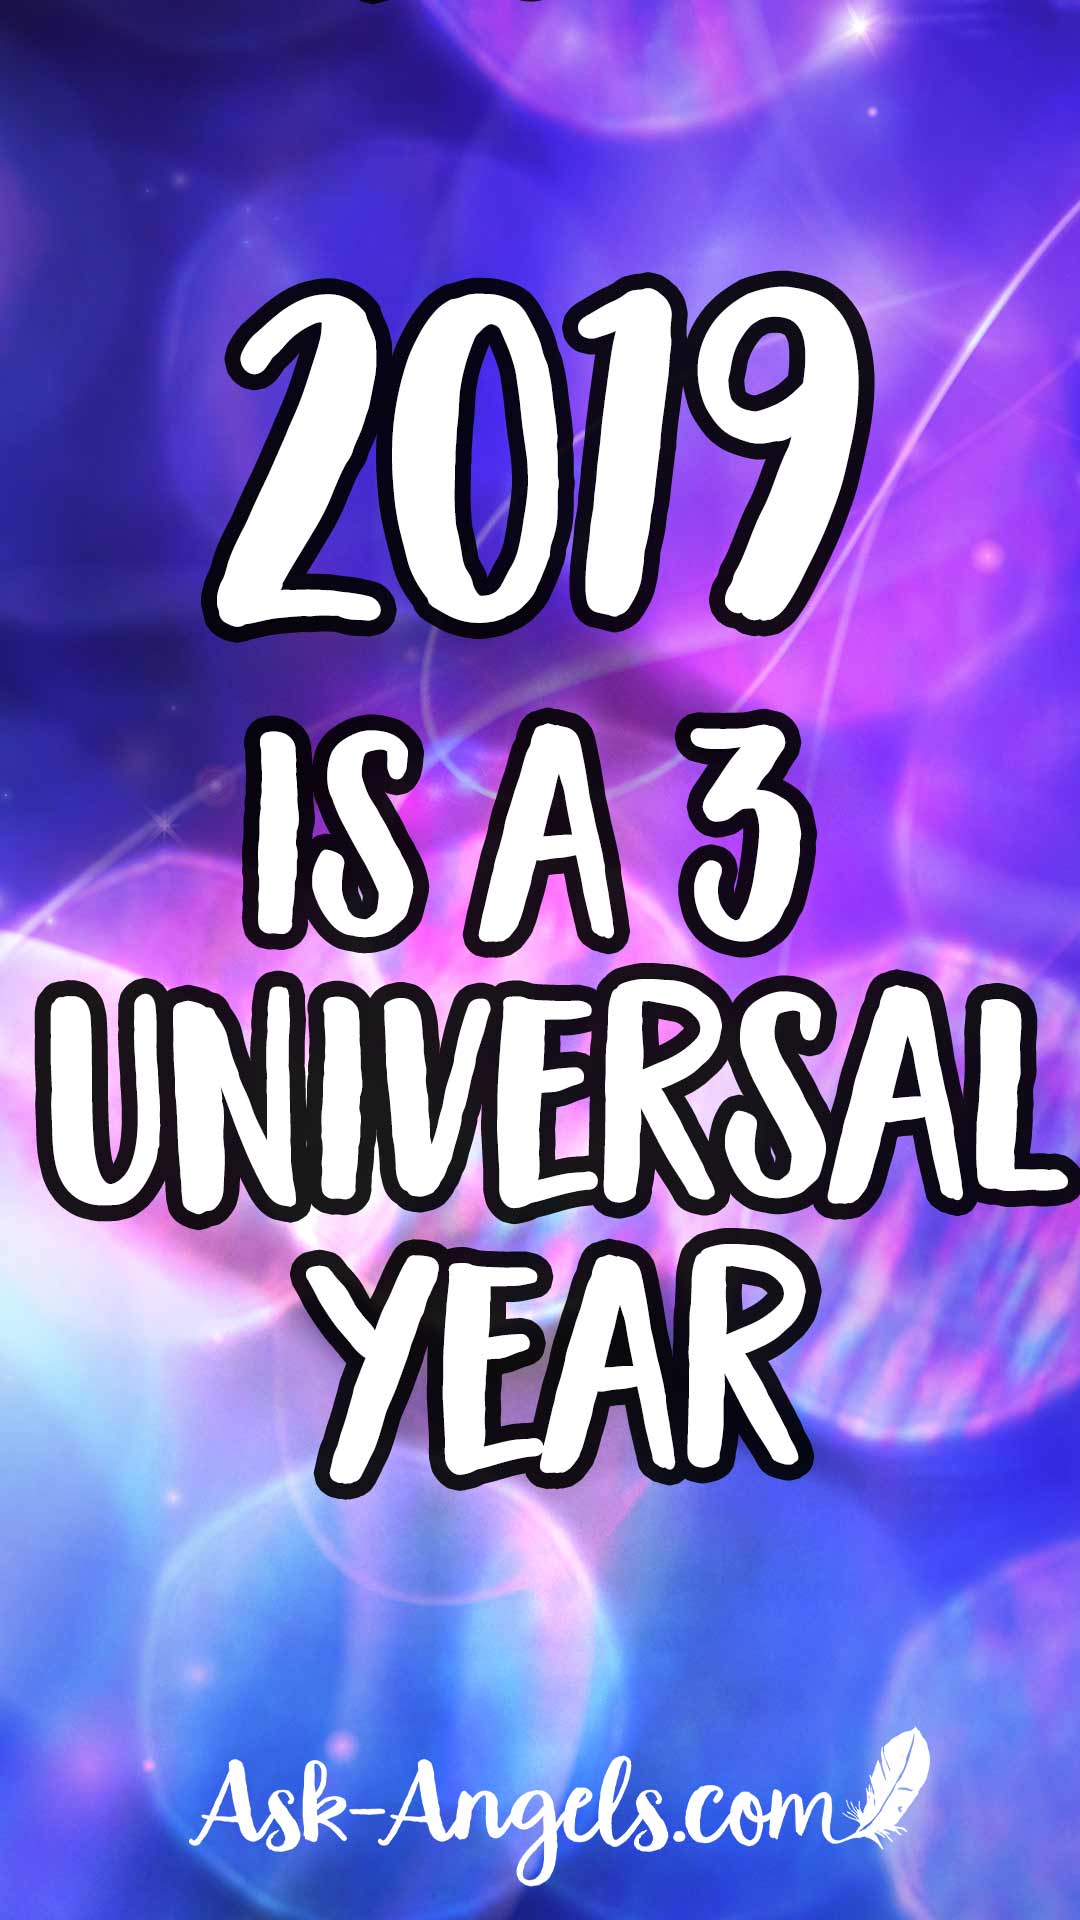 2019 Is a 3 Universal Year